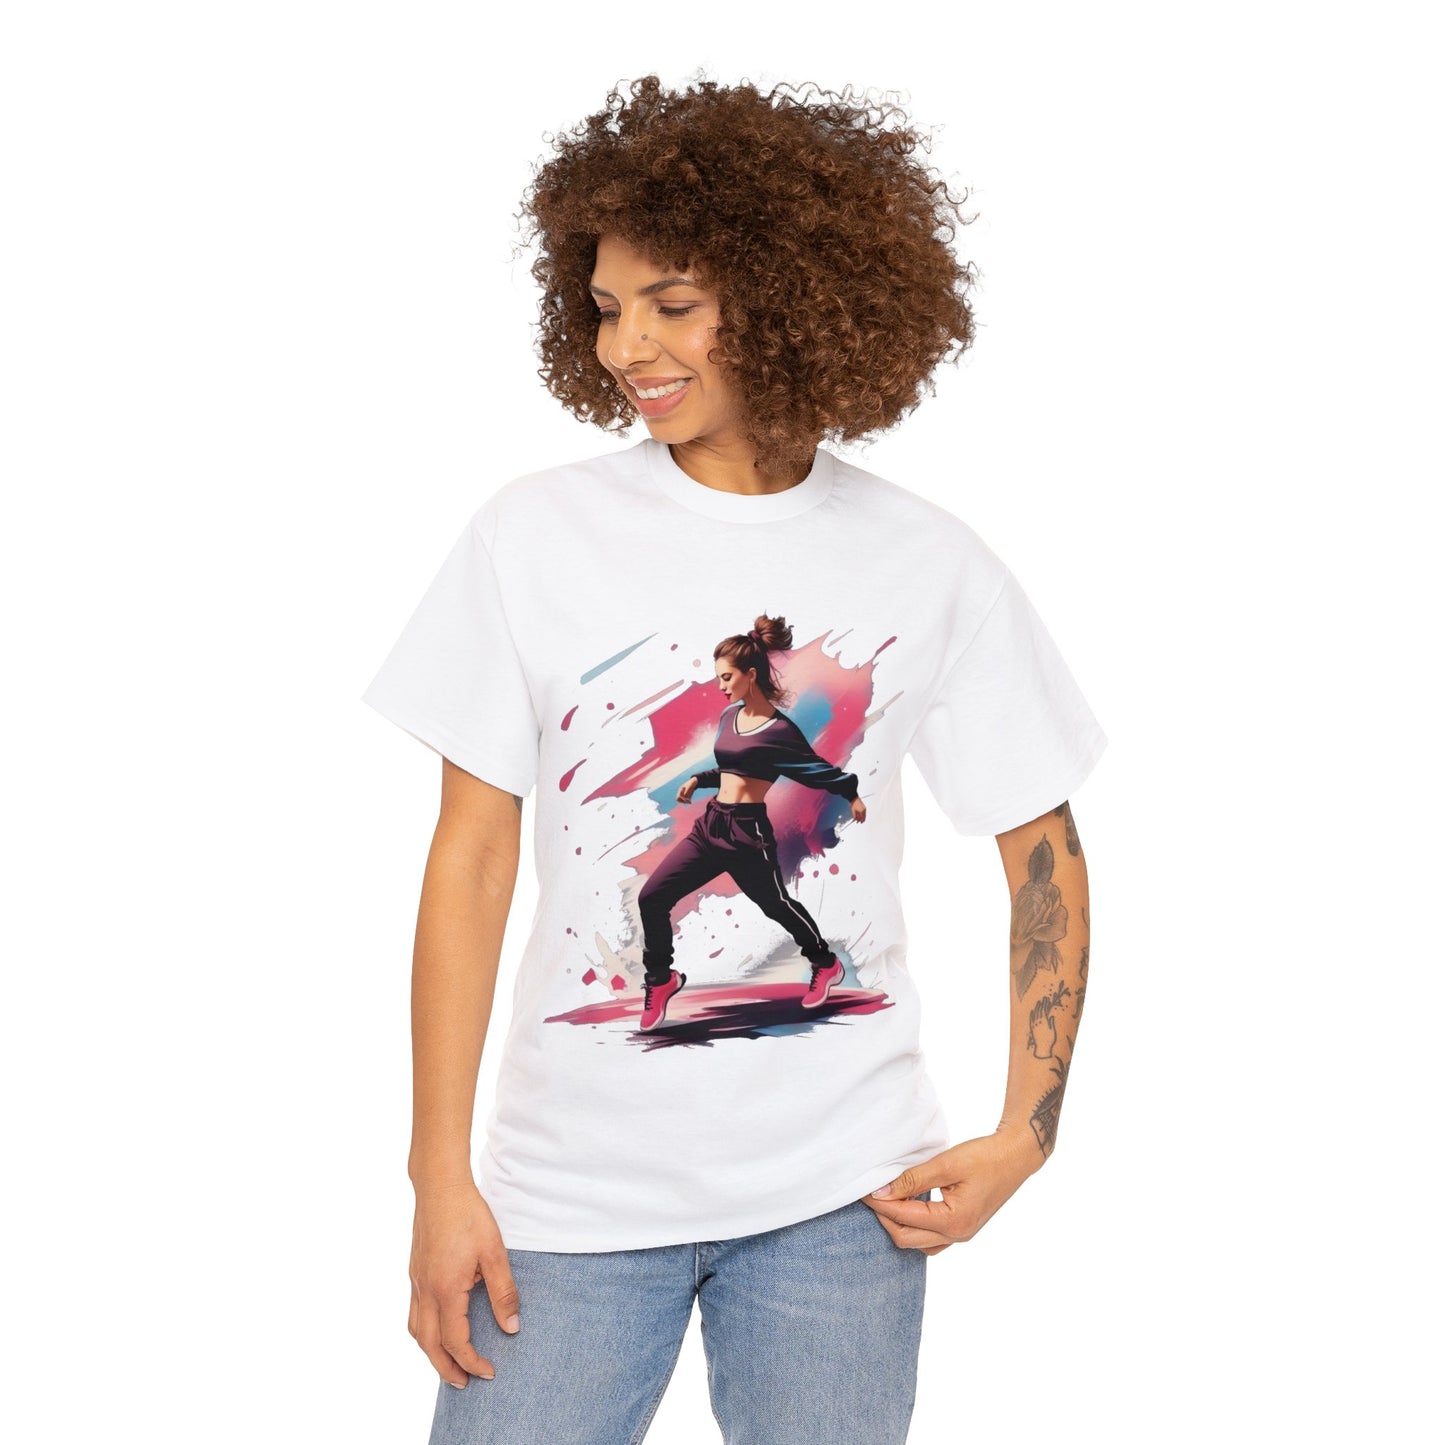 Dance Like Nobody's Watching: Pink T-Shirt with Dancing Woman Graphic